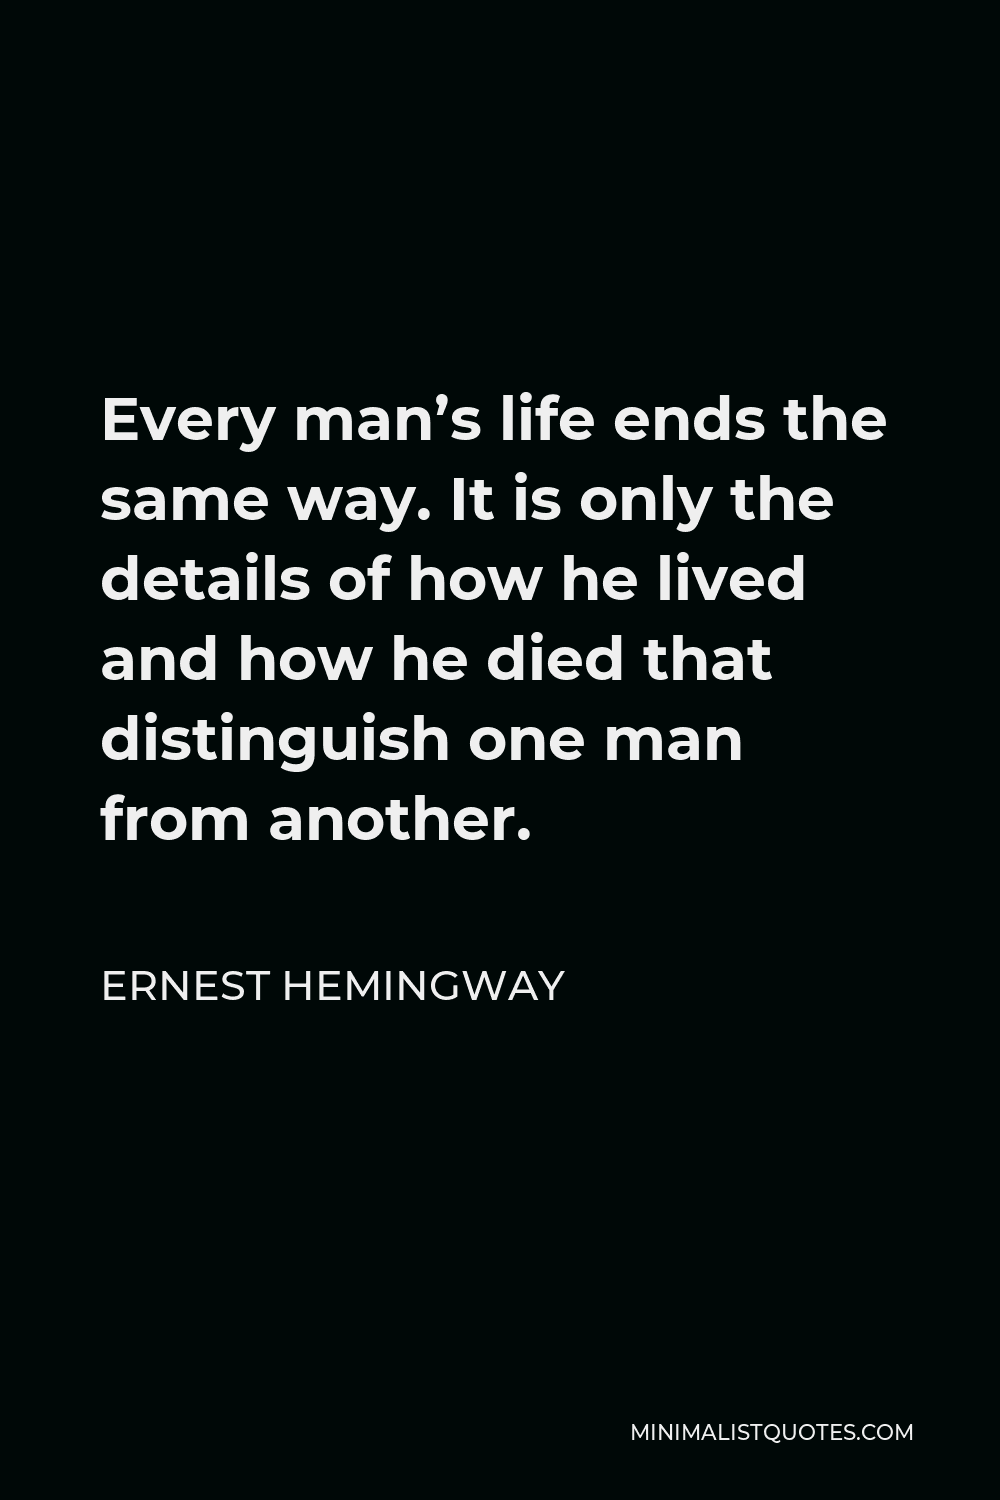 Ernest Hemingway Quote - Every man’s life ends the same way. It is only the details of how he lived and how he died that distinguish one man from another.